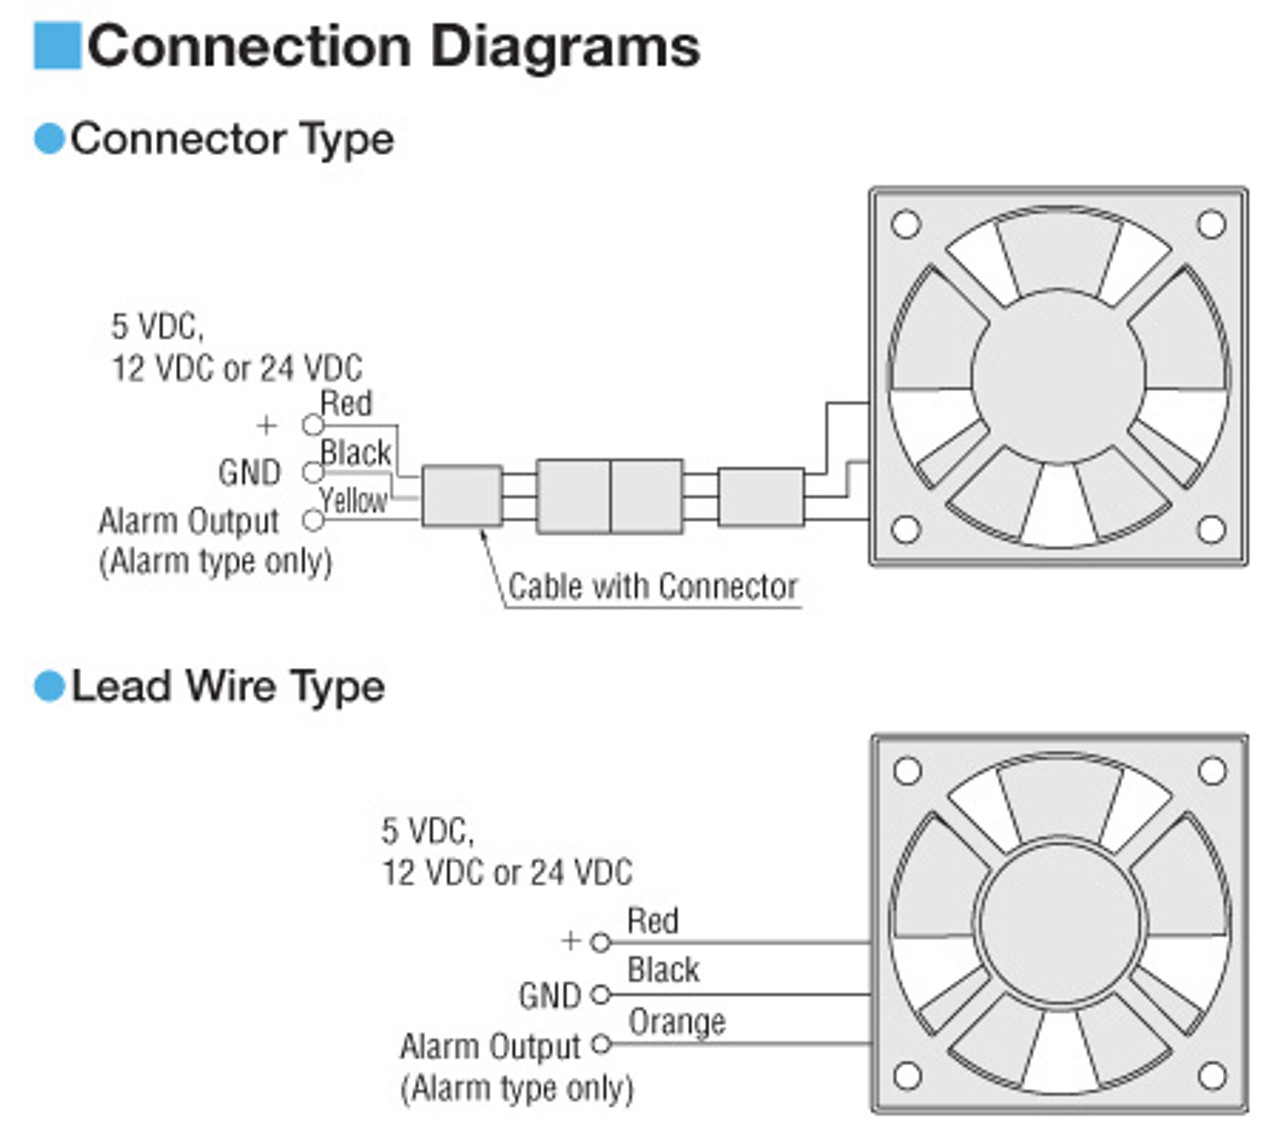 MDS510-12L - Connection